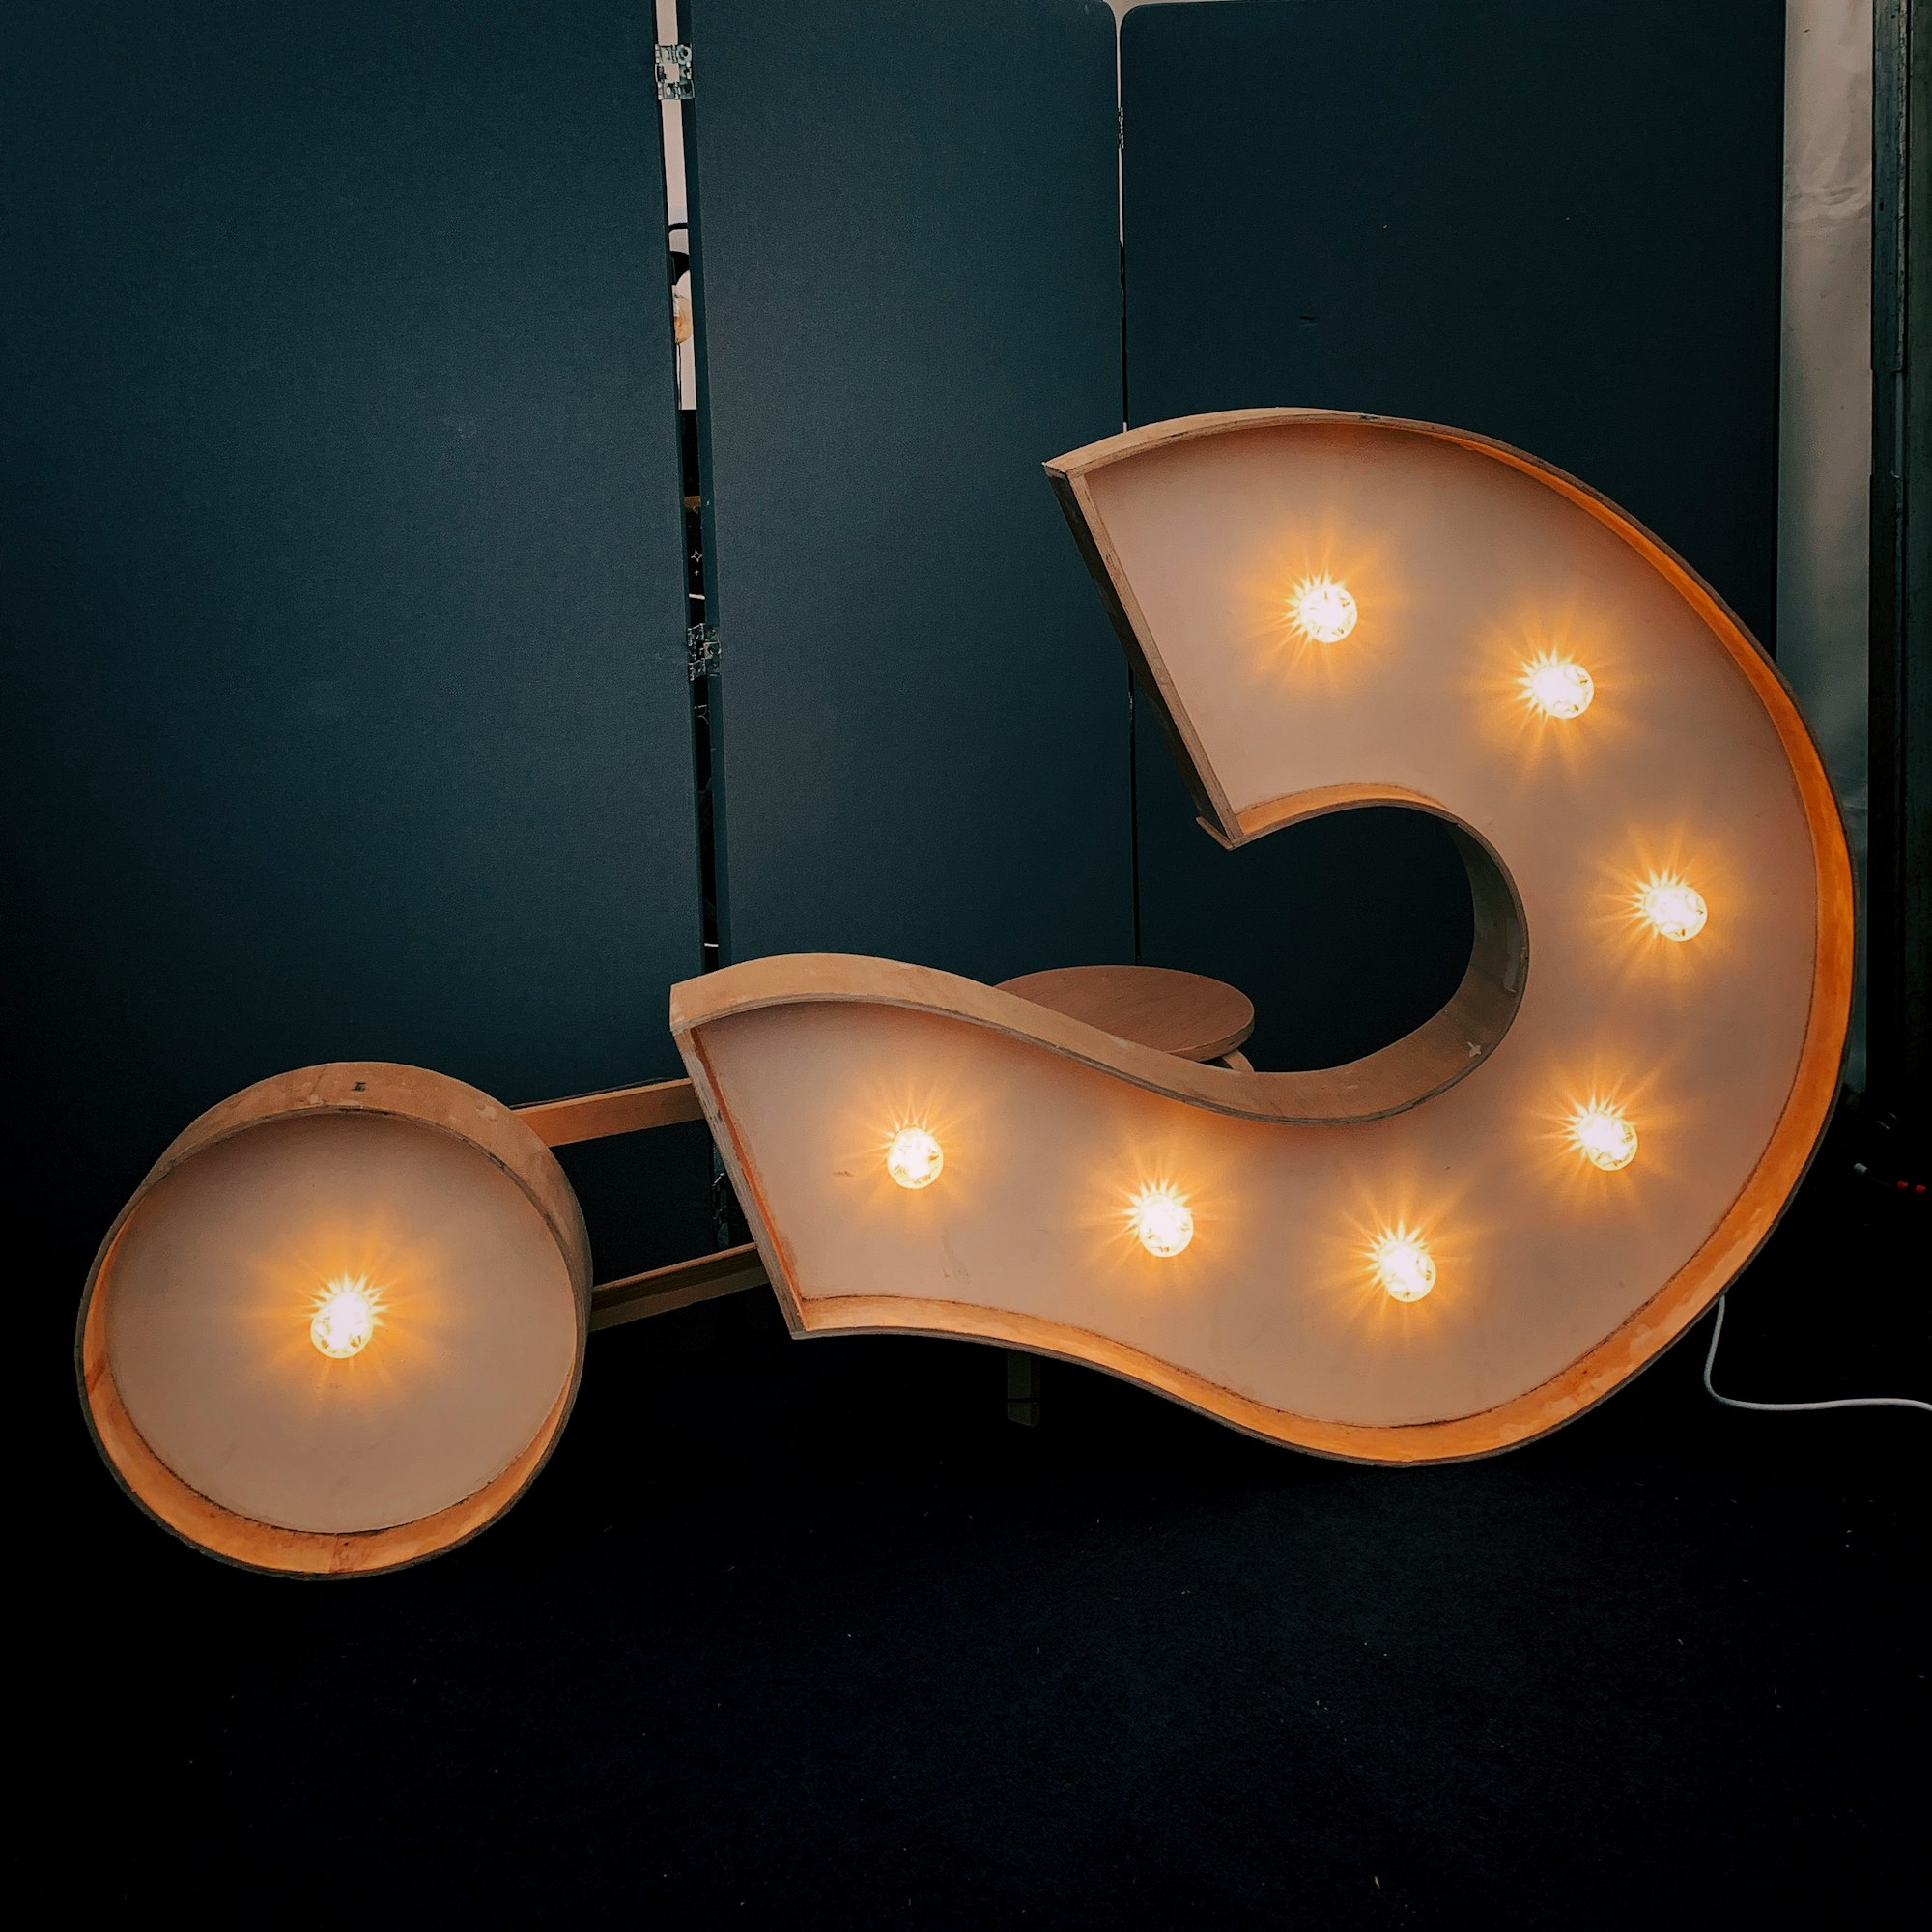 A large, lit question mark symbol, turned 90 degrees on its side.